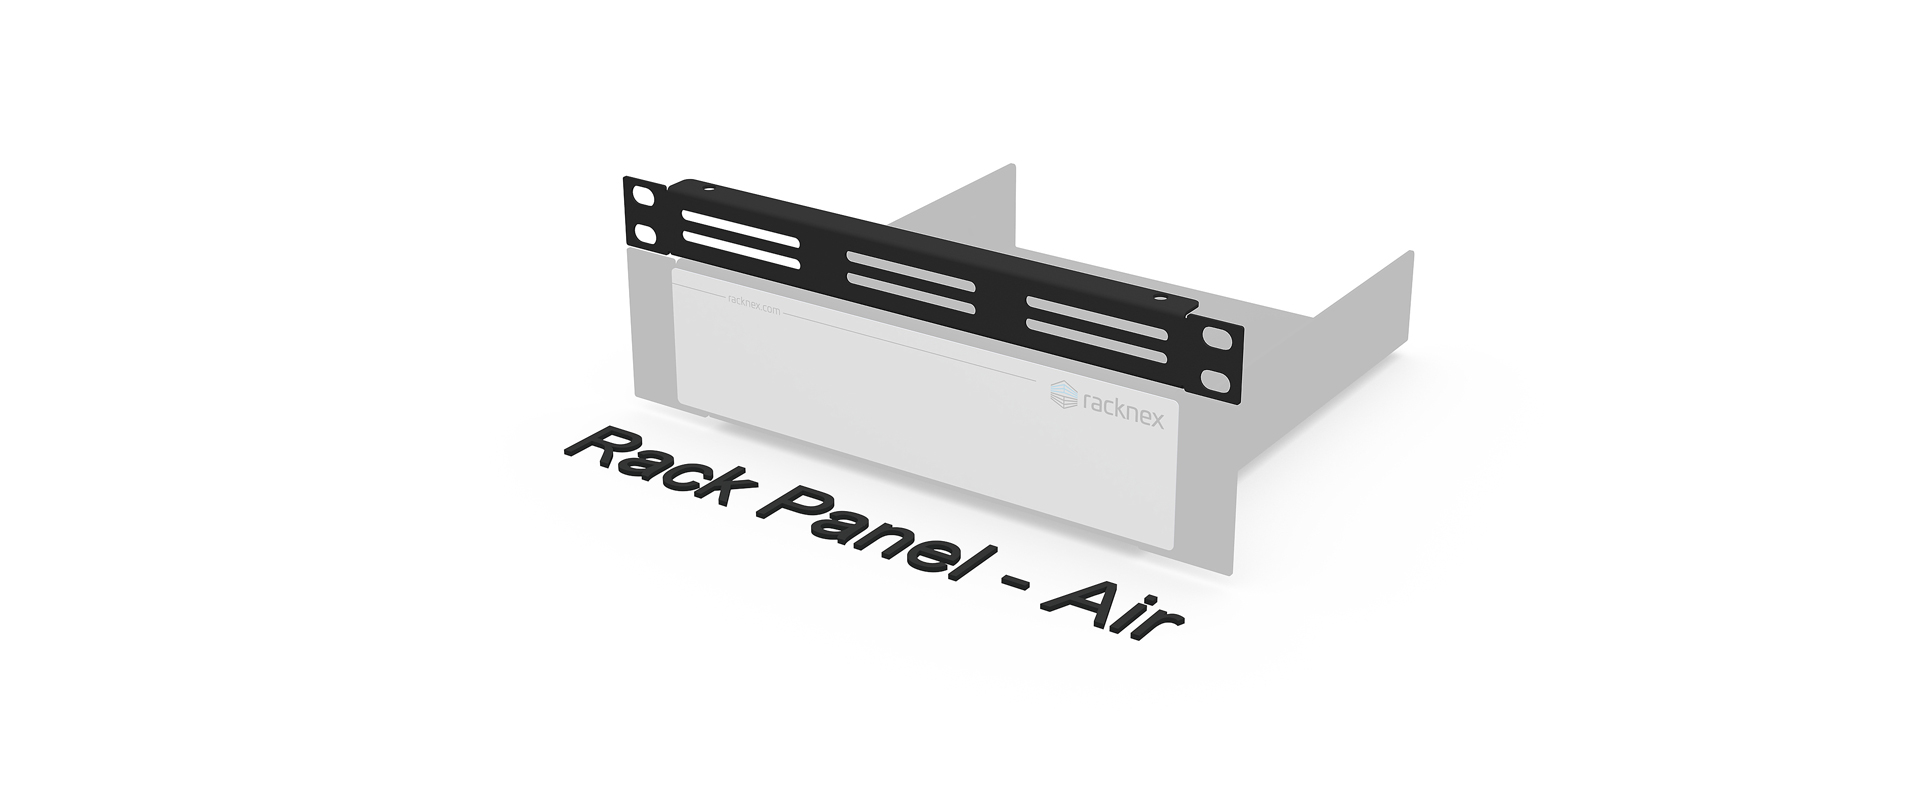 with Rack Panel Air (zr-frv-313)